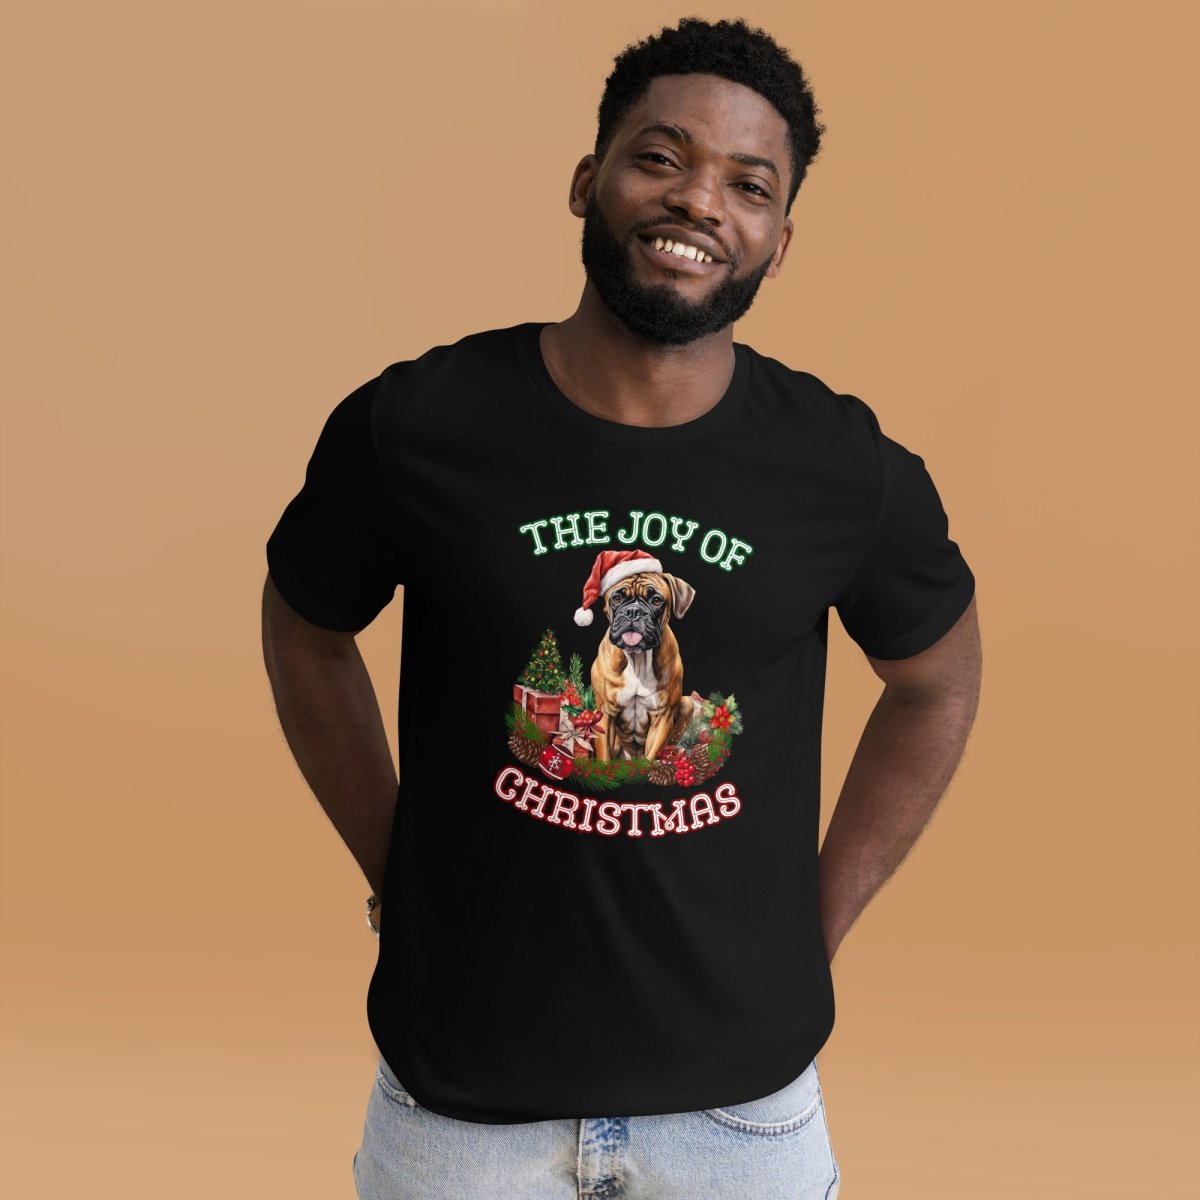 Christmas Boxer T-Shirt - High Quality Festive Unisex T-Shirt, Gift for Boxer Owner, Gift for Doglovers, Funny Xmas Shirt, Cute Xmas Dog Tee - Everything Pixel